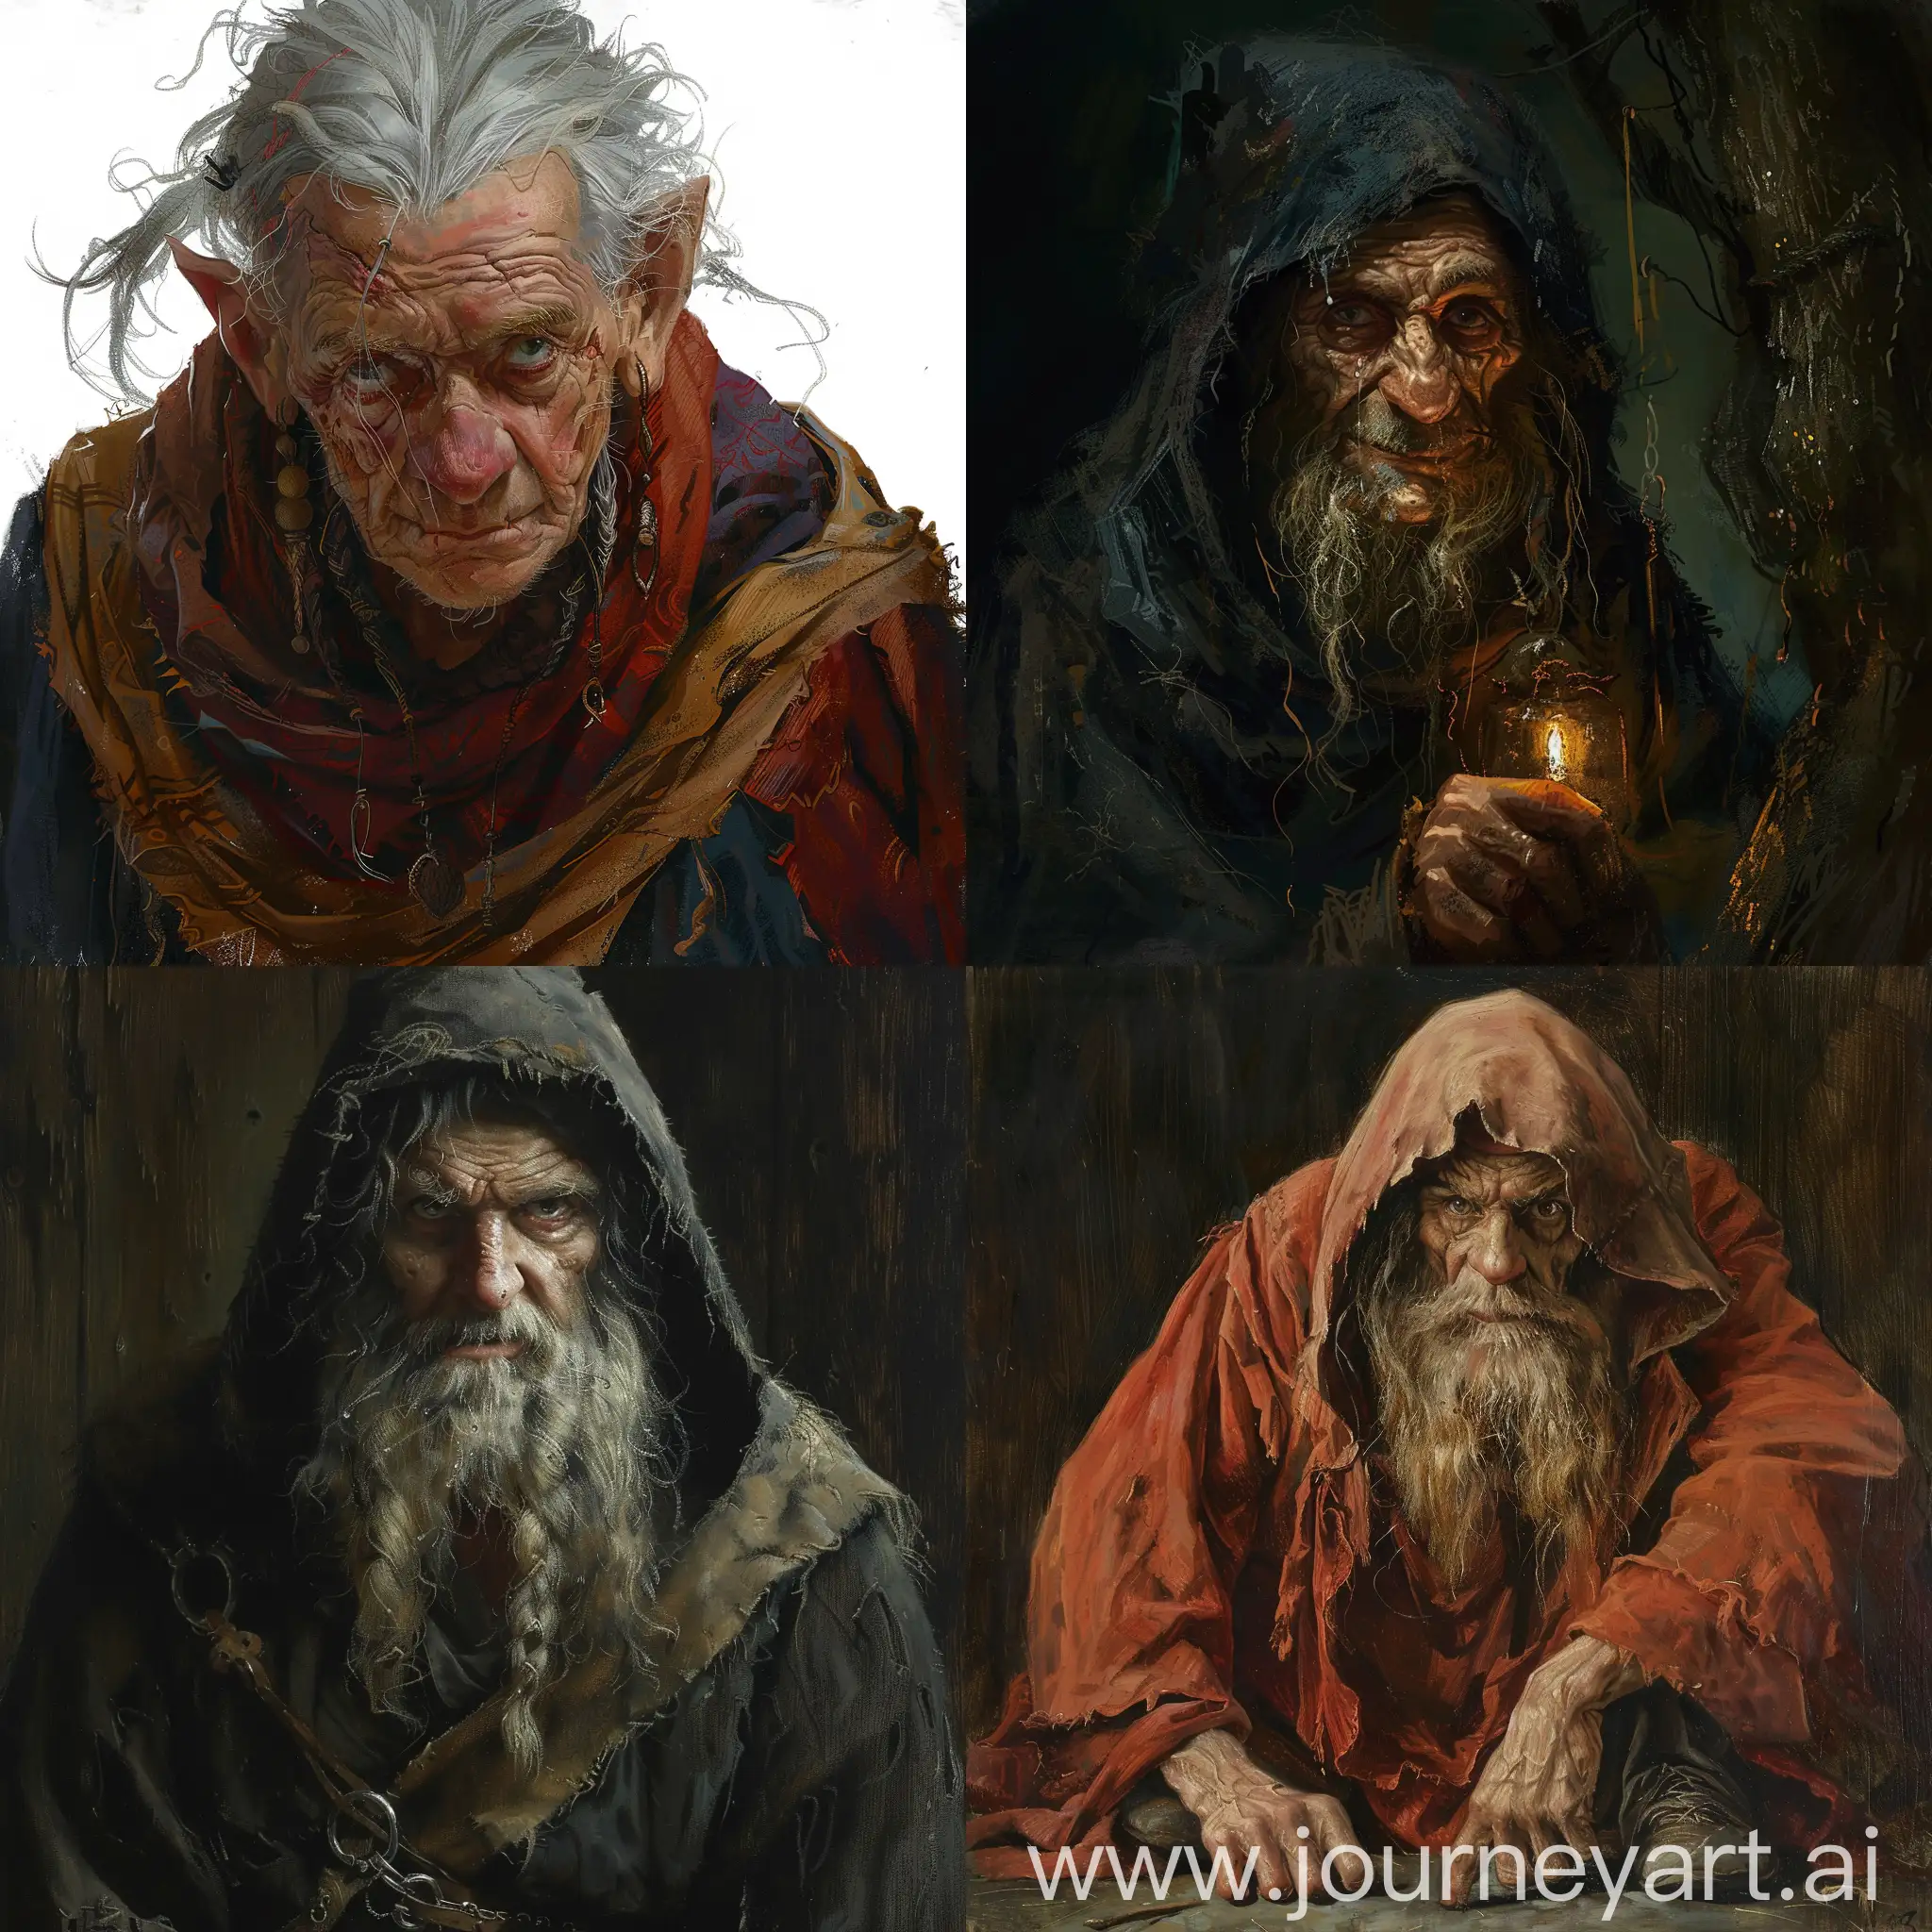 Dark-Young-Bard-Portrait-of-an-Evil-Hermit